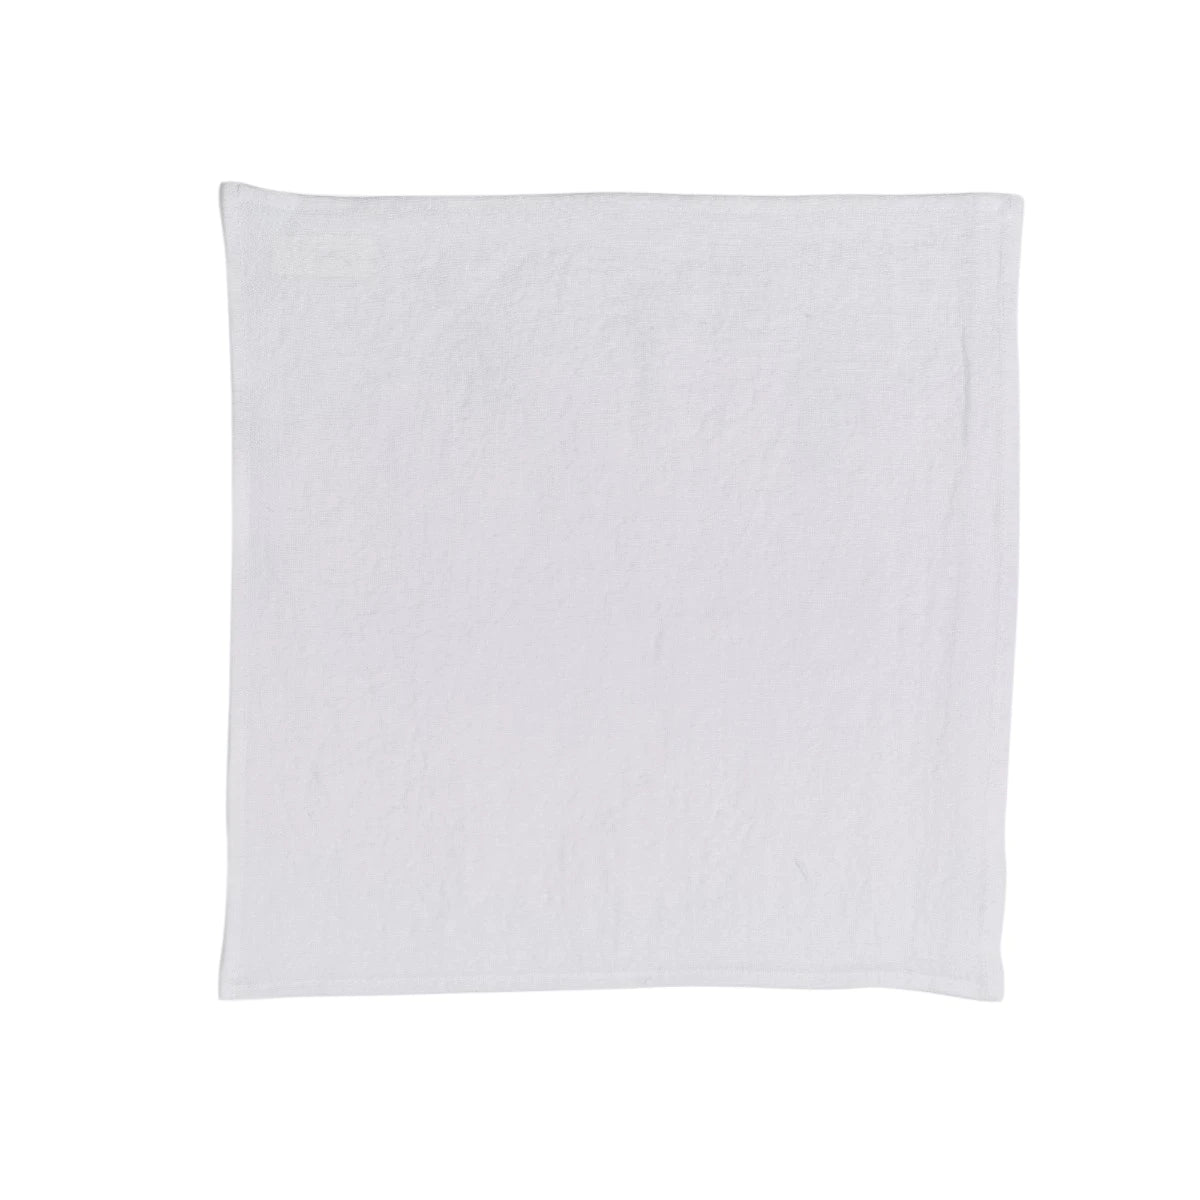 linen skye napkin by Libeco at adorn.house